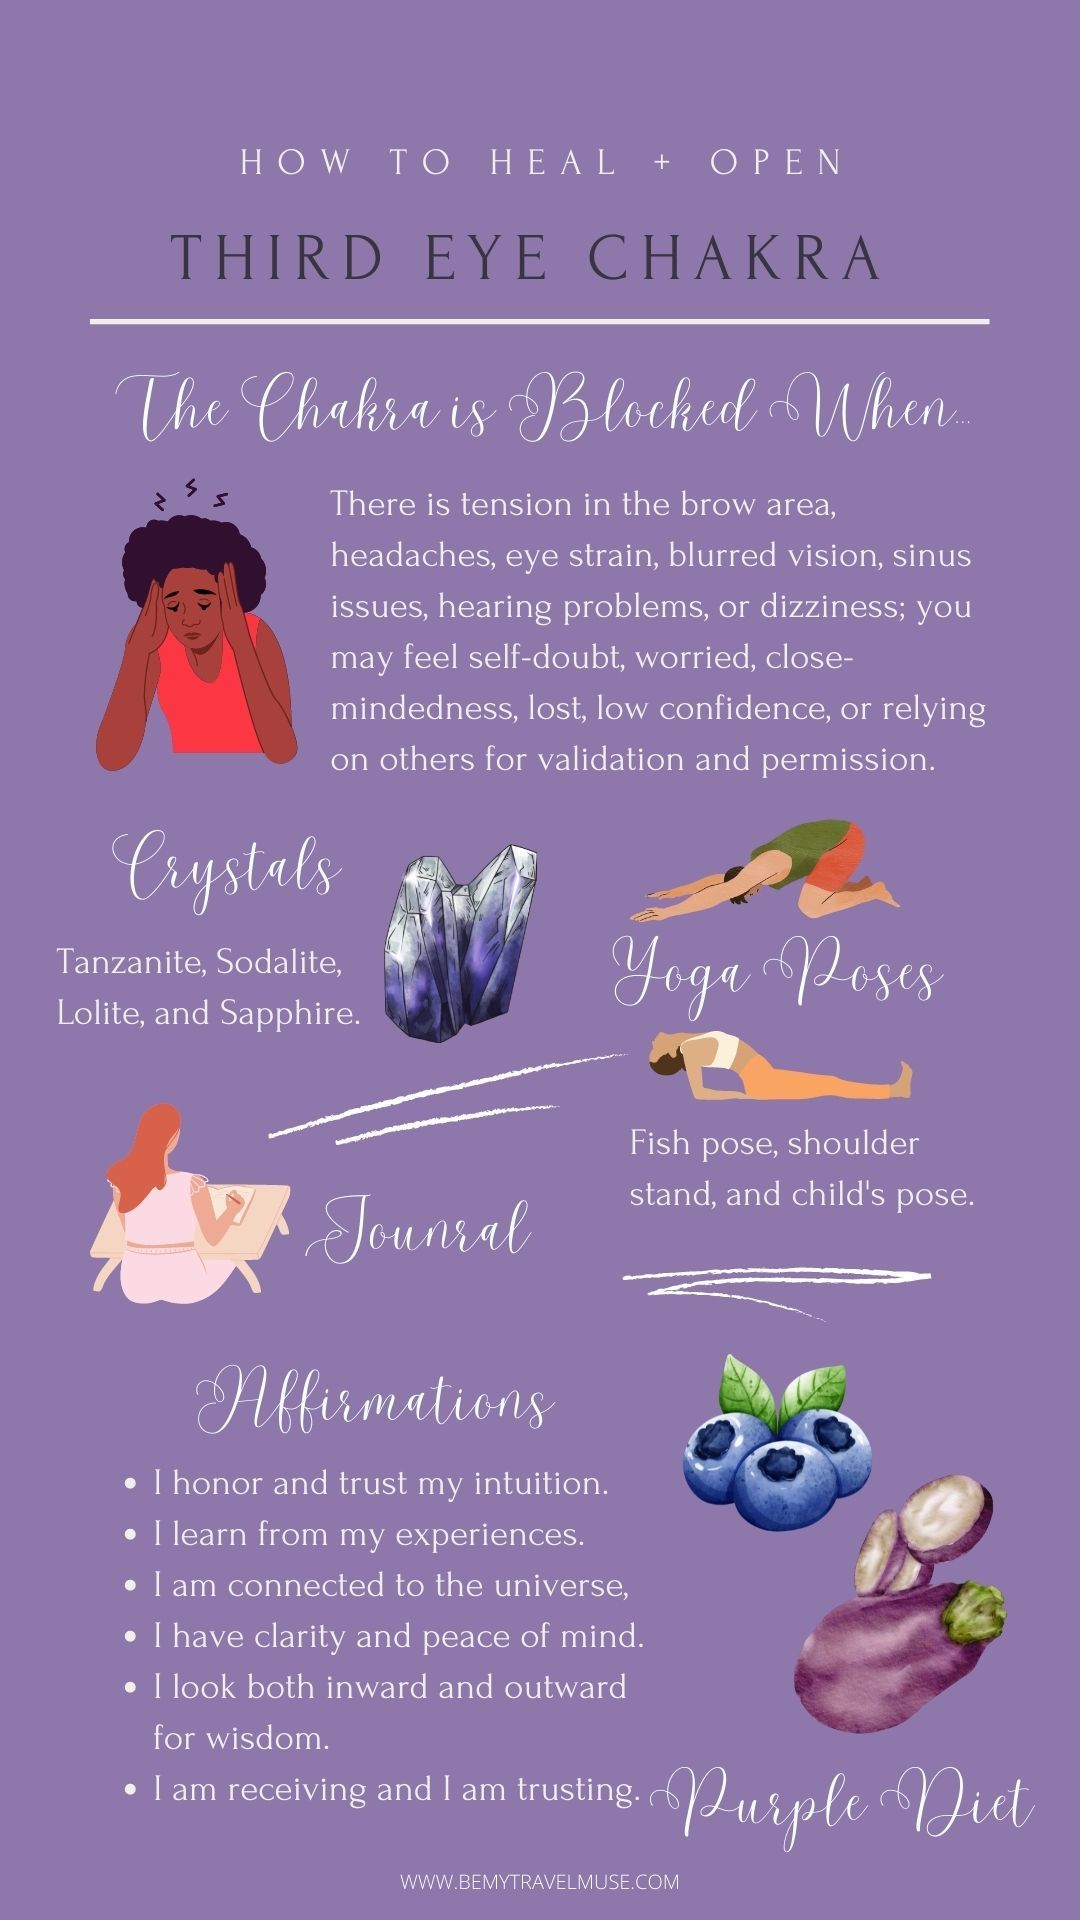 a guide to third eye chakra, learn how to open and heal your third eye chakra through meditation, affirmation, yoga, essential oil and crystals.